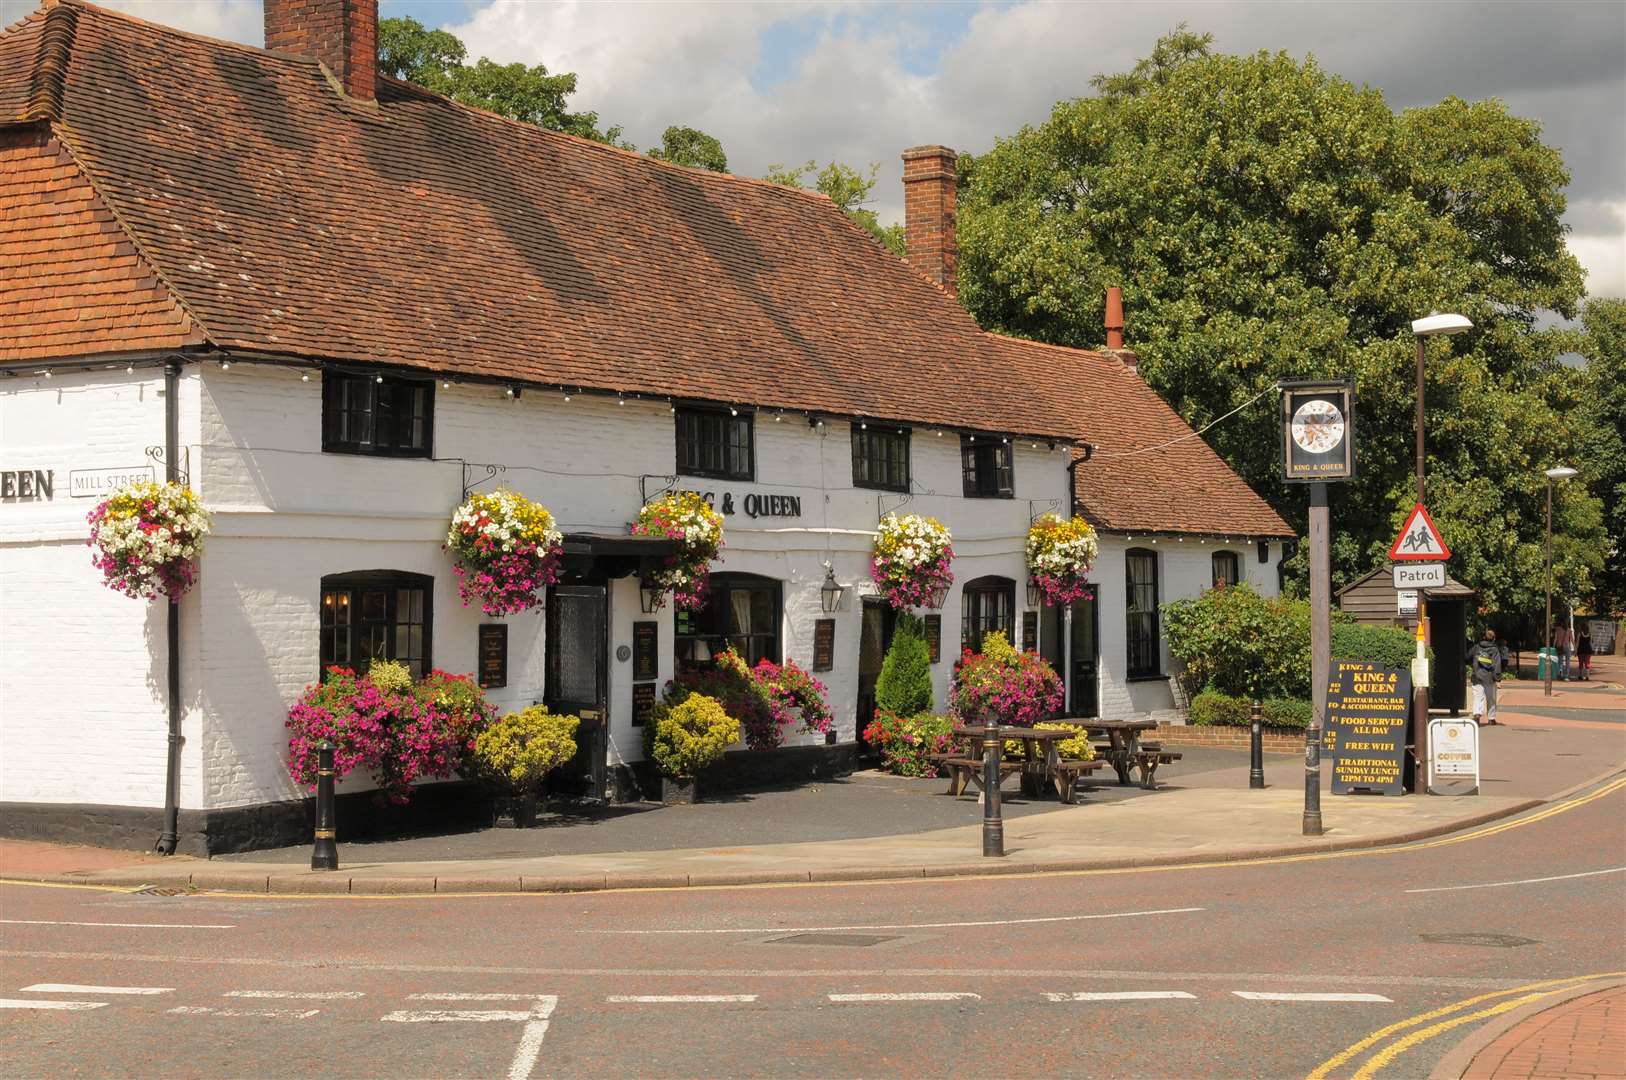 The King and Queen pub in East Malling. Picture: Steve Crispe